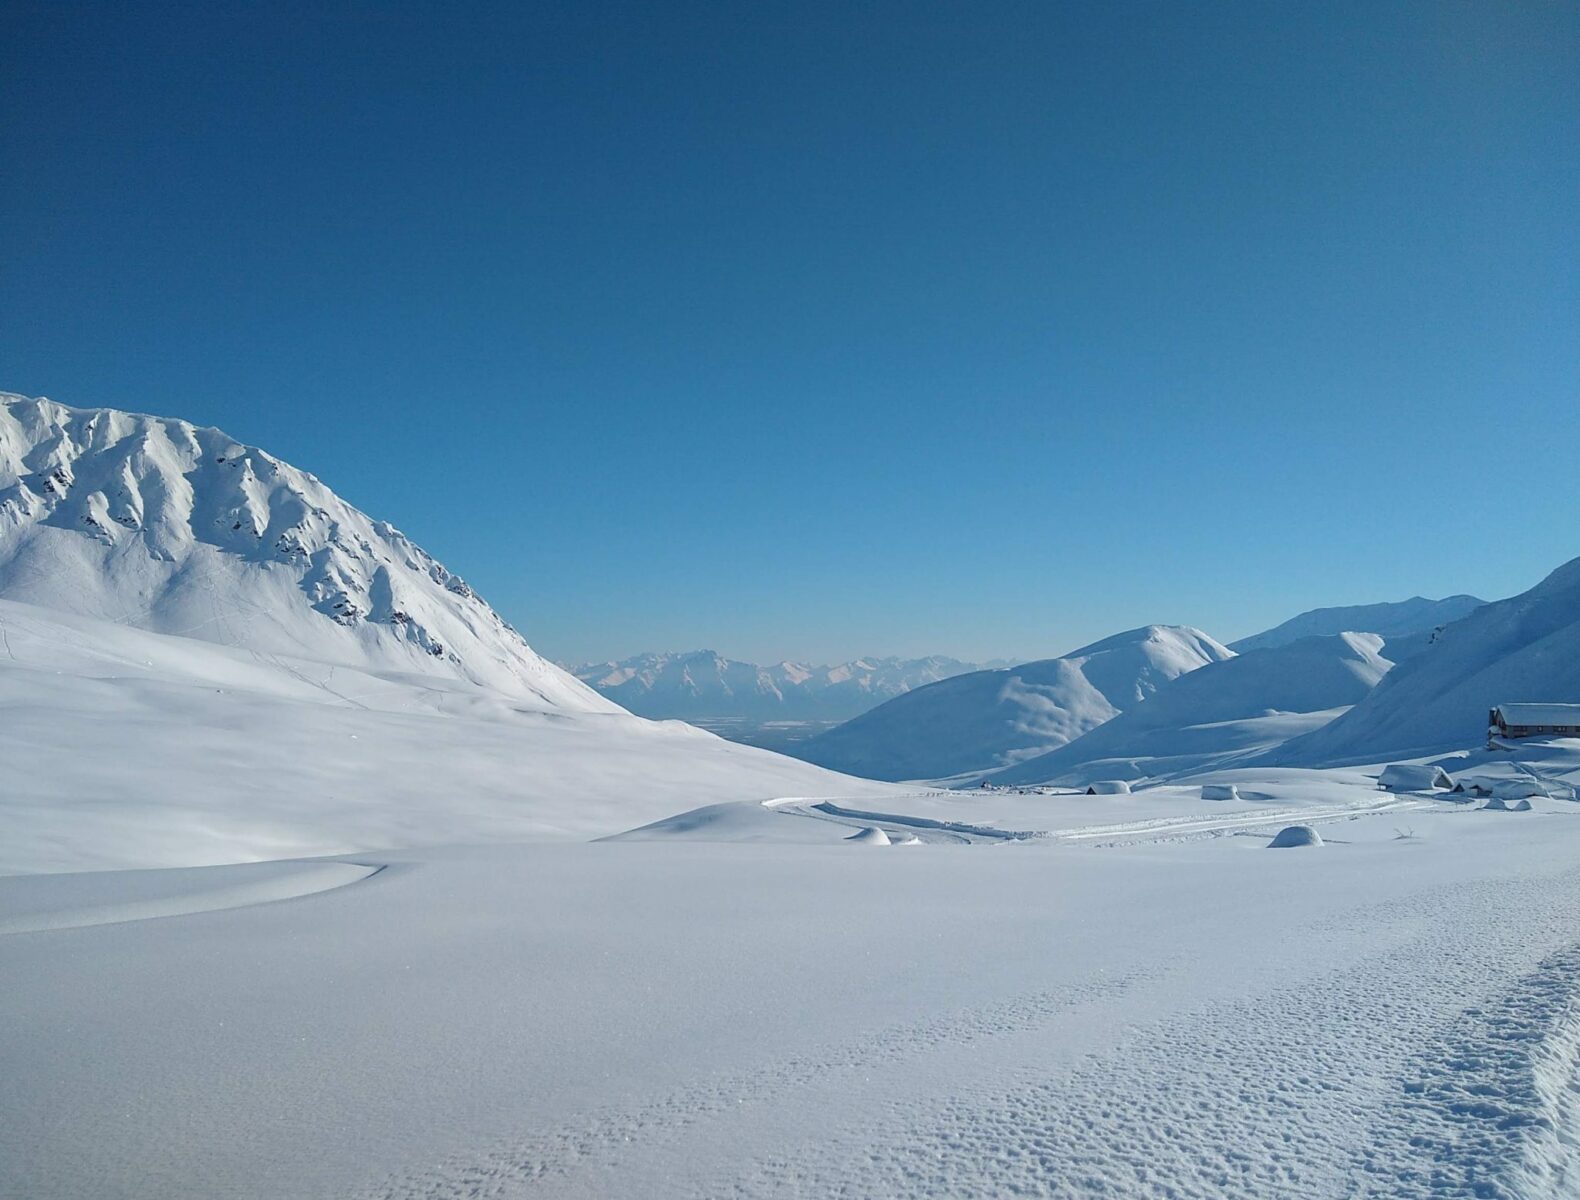 Hatcher Pass in Alaska in winter. There is a giant snowy valley surrounded by mountains on a snowy day. There are even higher mountains in the distance